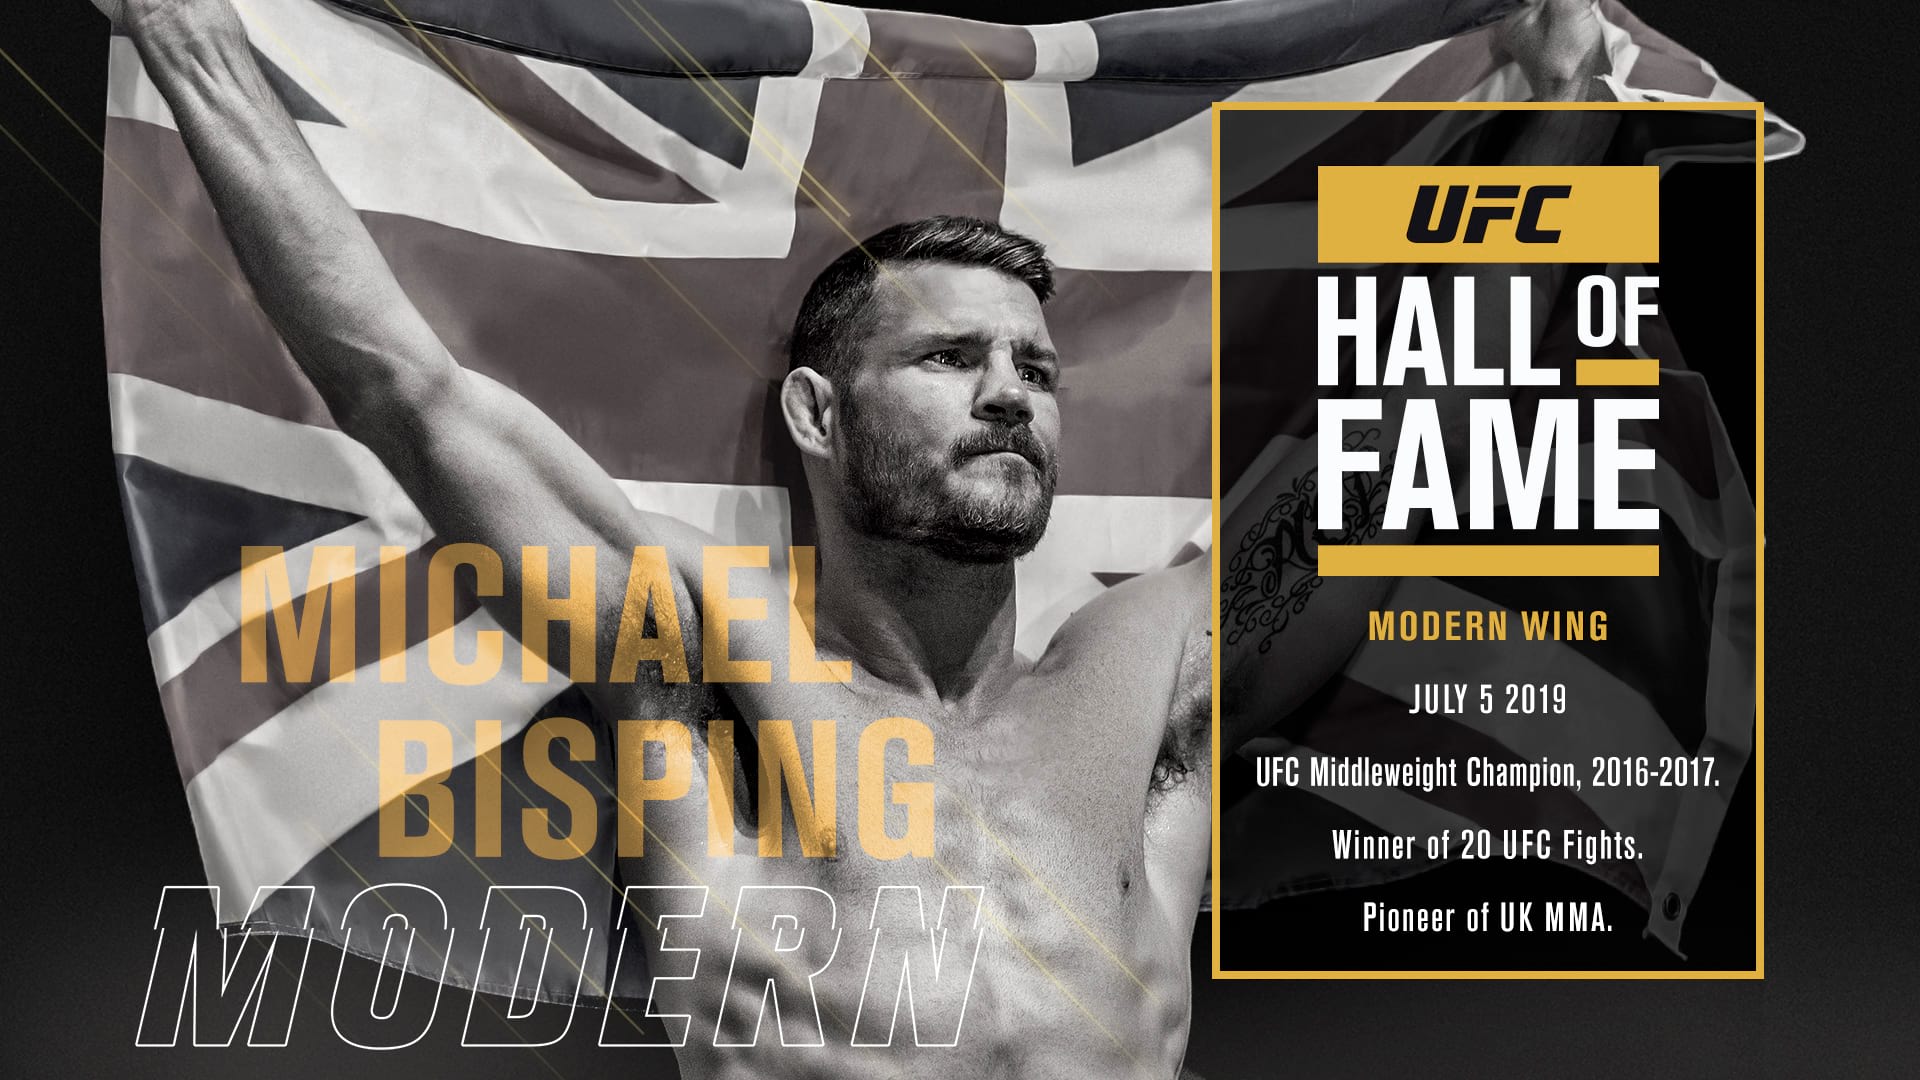 Michael Bisping has become the latest inductee of the UFC Hall of Fame